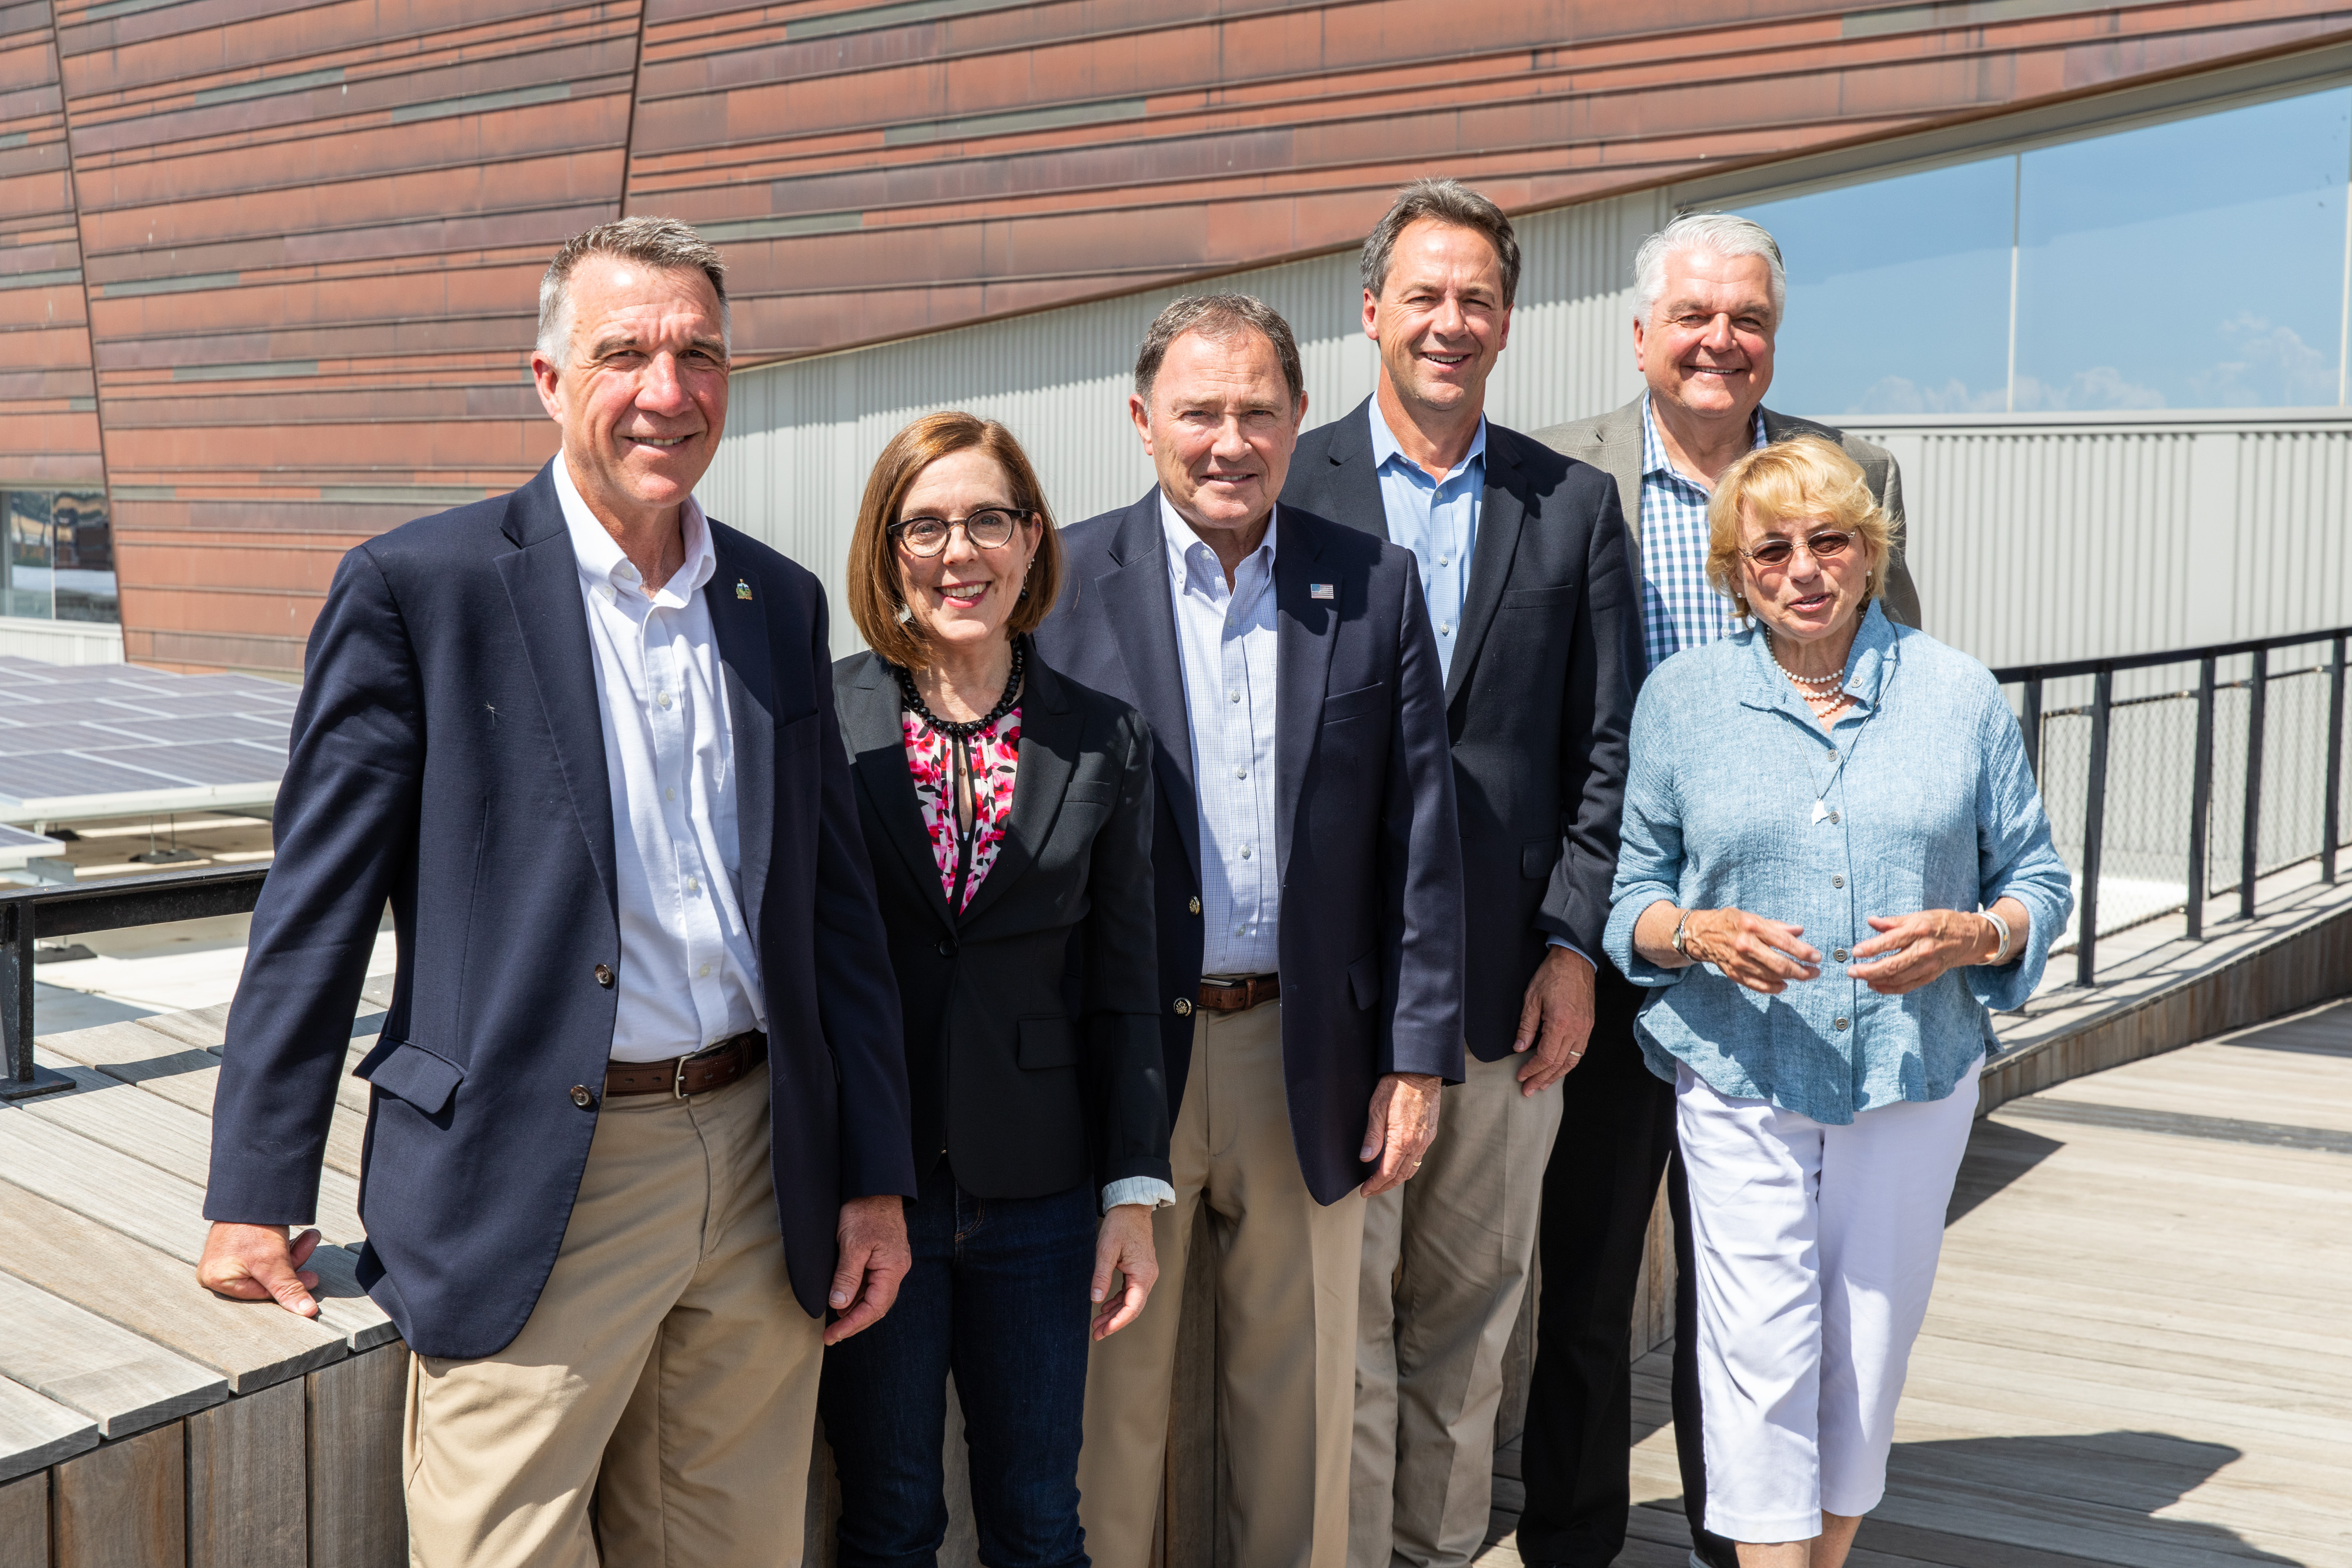 Vermont Governor Phil Scott, Oregon Governor Kate Brown, Utah Governor Gary Herbert, Montana Governor Steve Bullock, Nevada Governor Steve Sisolak and Maine Governor Janet Mills after launching the Outdoor Recreation Learning Network at the Utah Natural History Museum.